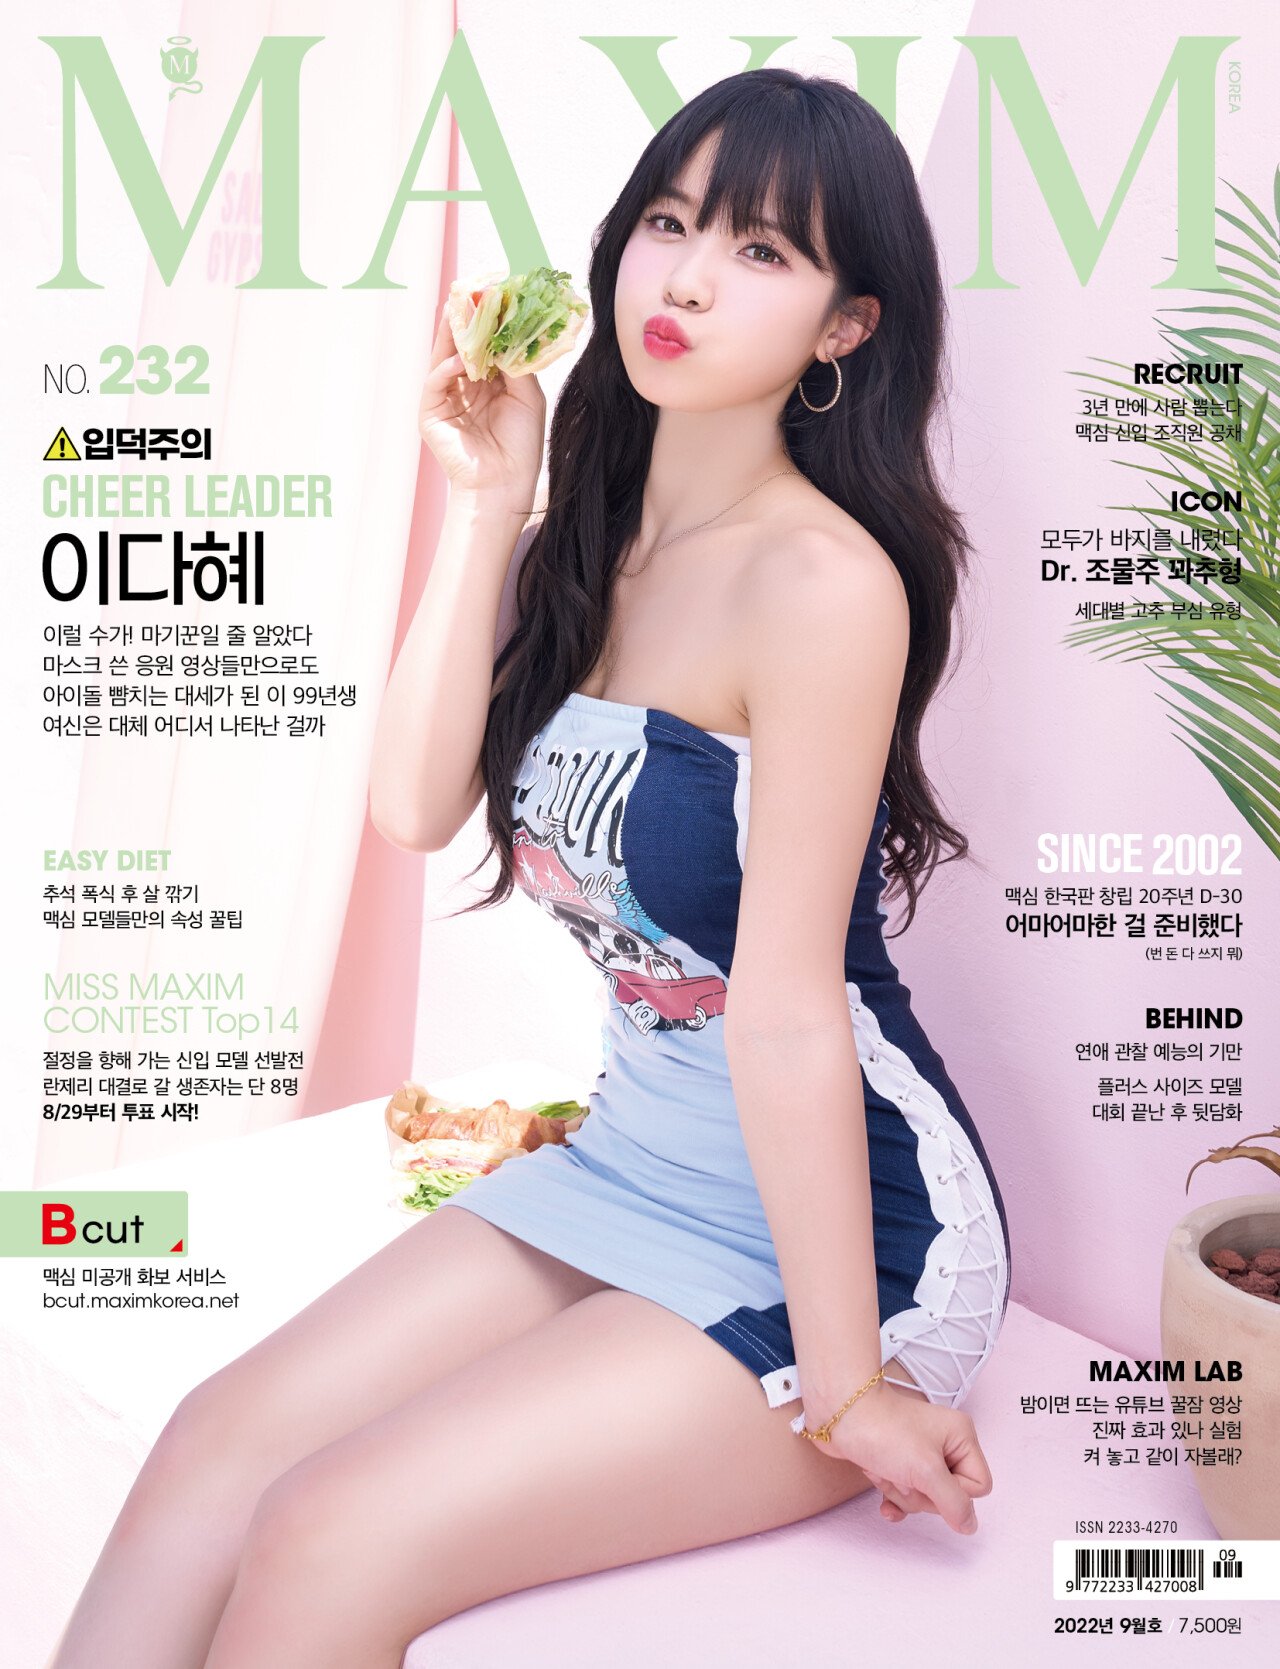 Two versions of cheerleader Lee Da-hye, who became the cover model for the September issue of Maxim